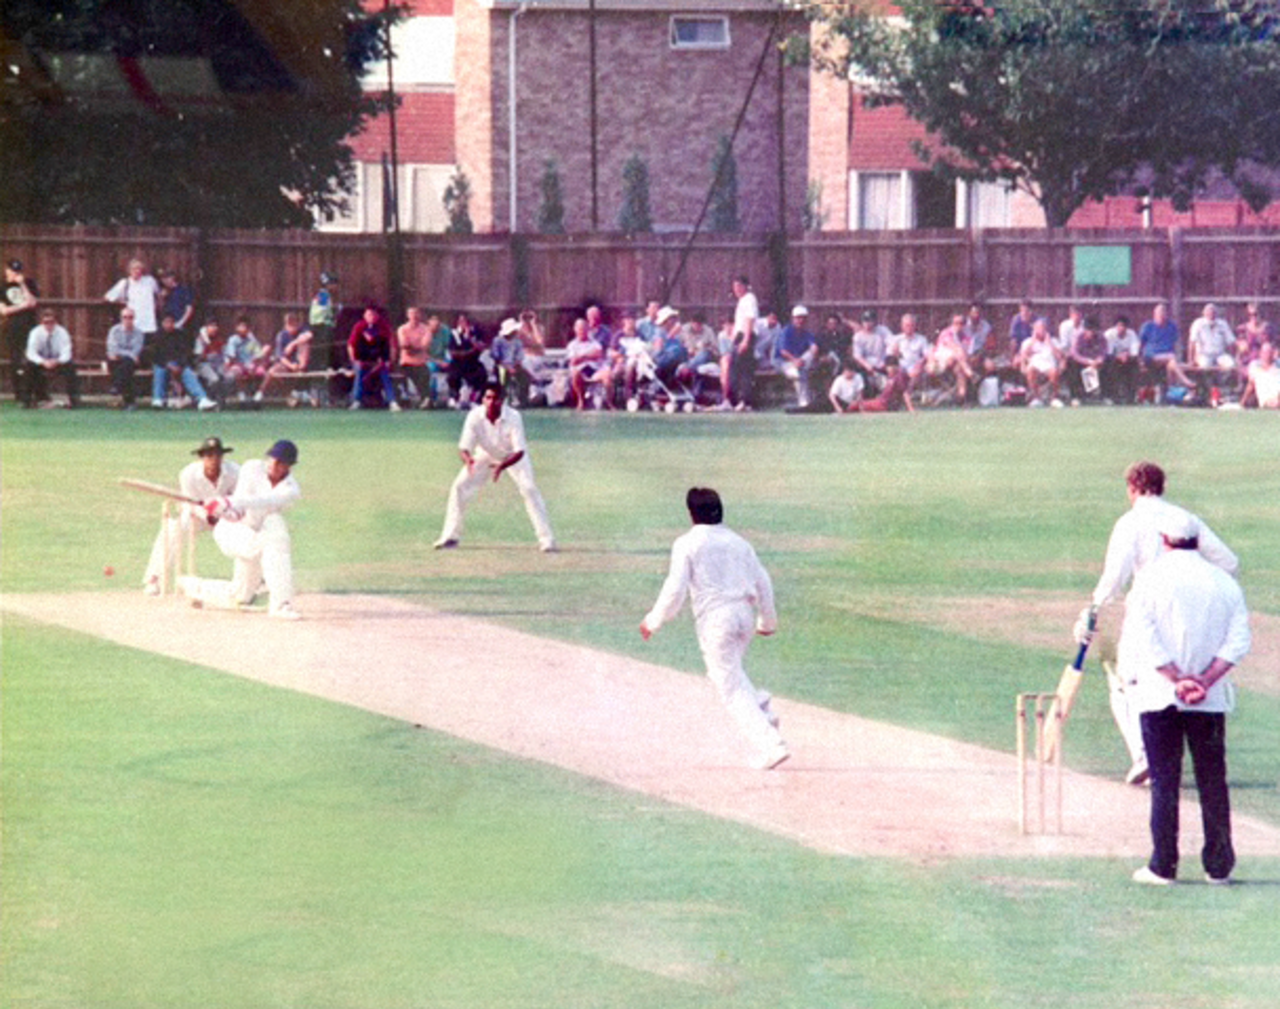 Mushtaq Ahmed bowling to Nick Folland of Minor Counties, Minor Counties v Pakistanis, Marlow, July 30, 1992